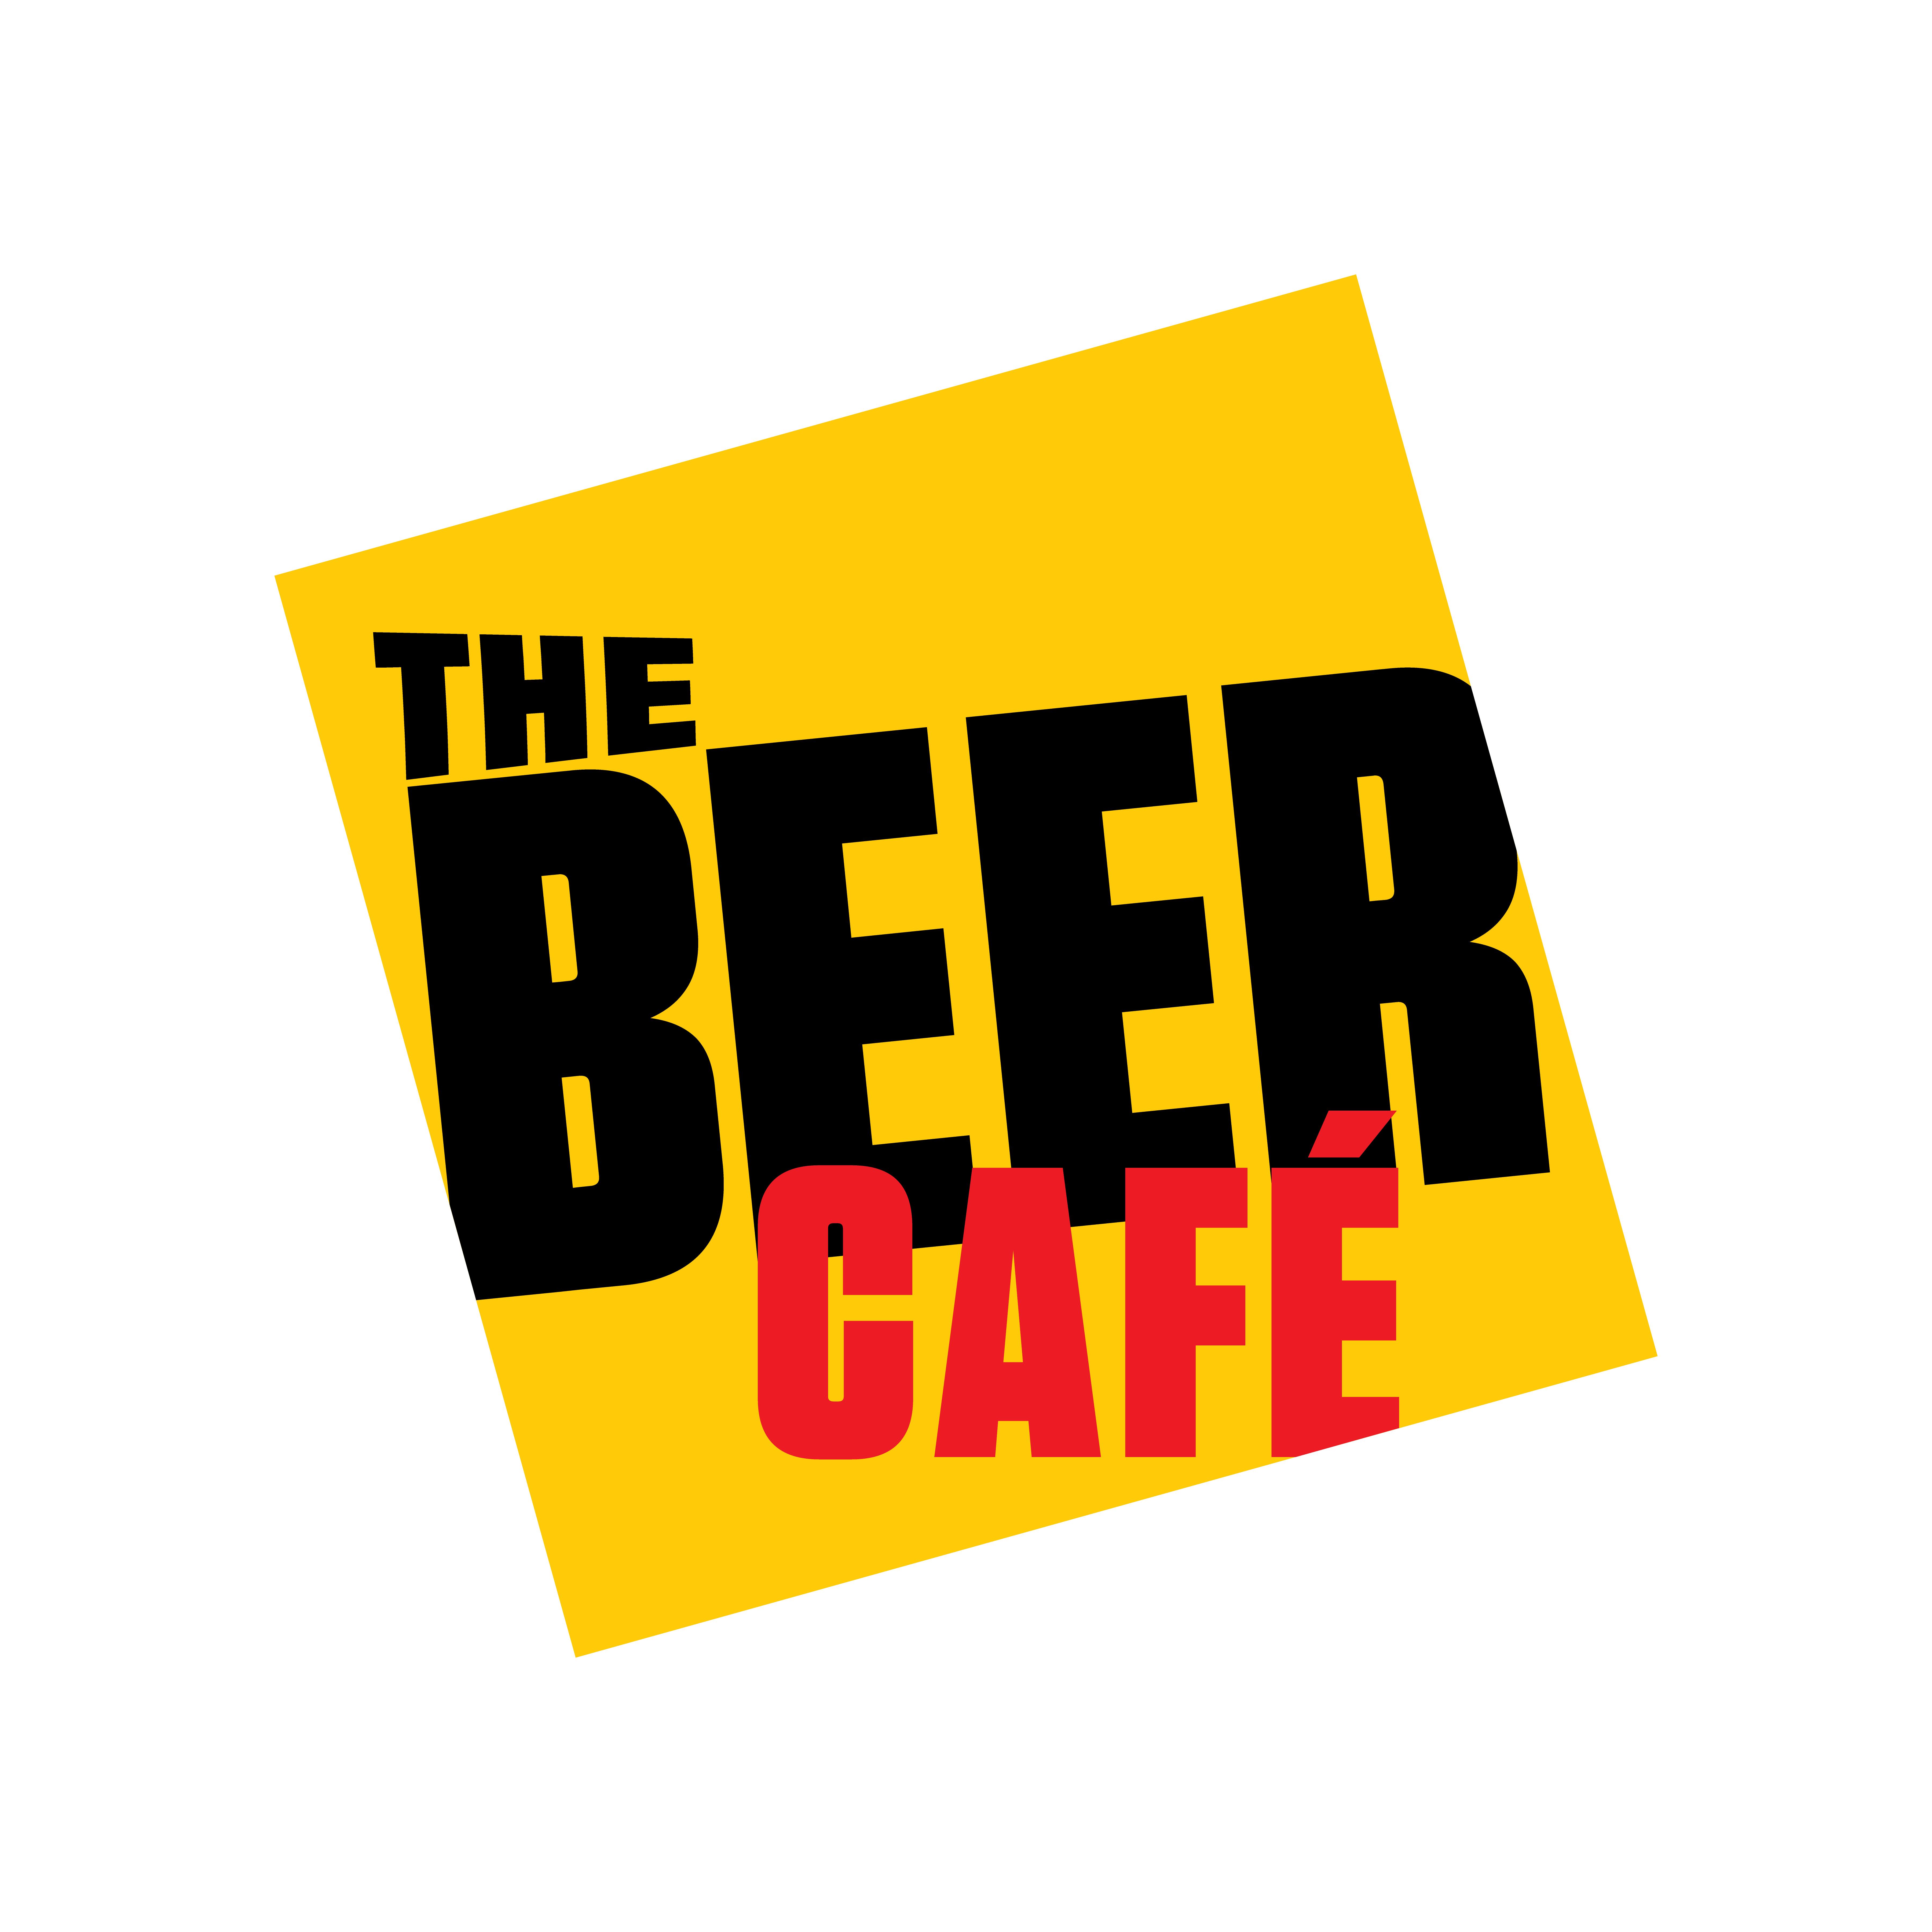 The Beer Cafe|Restaurant|Food and Restaurant